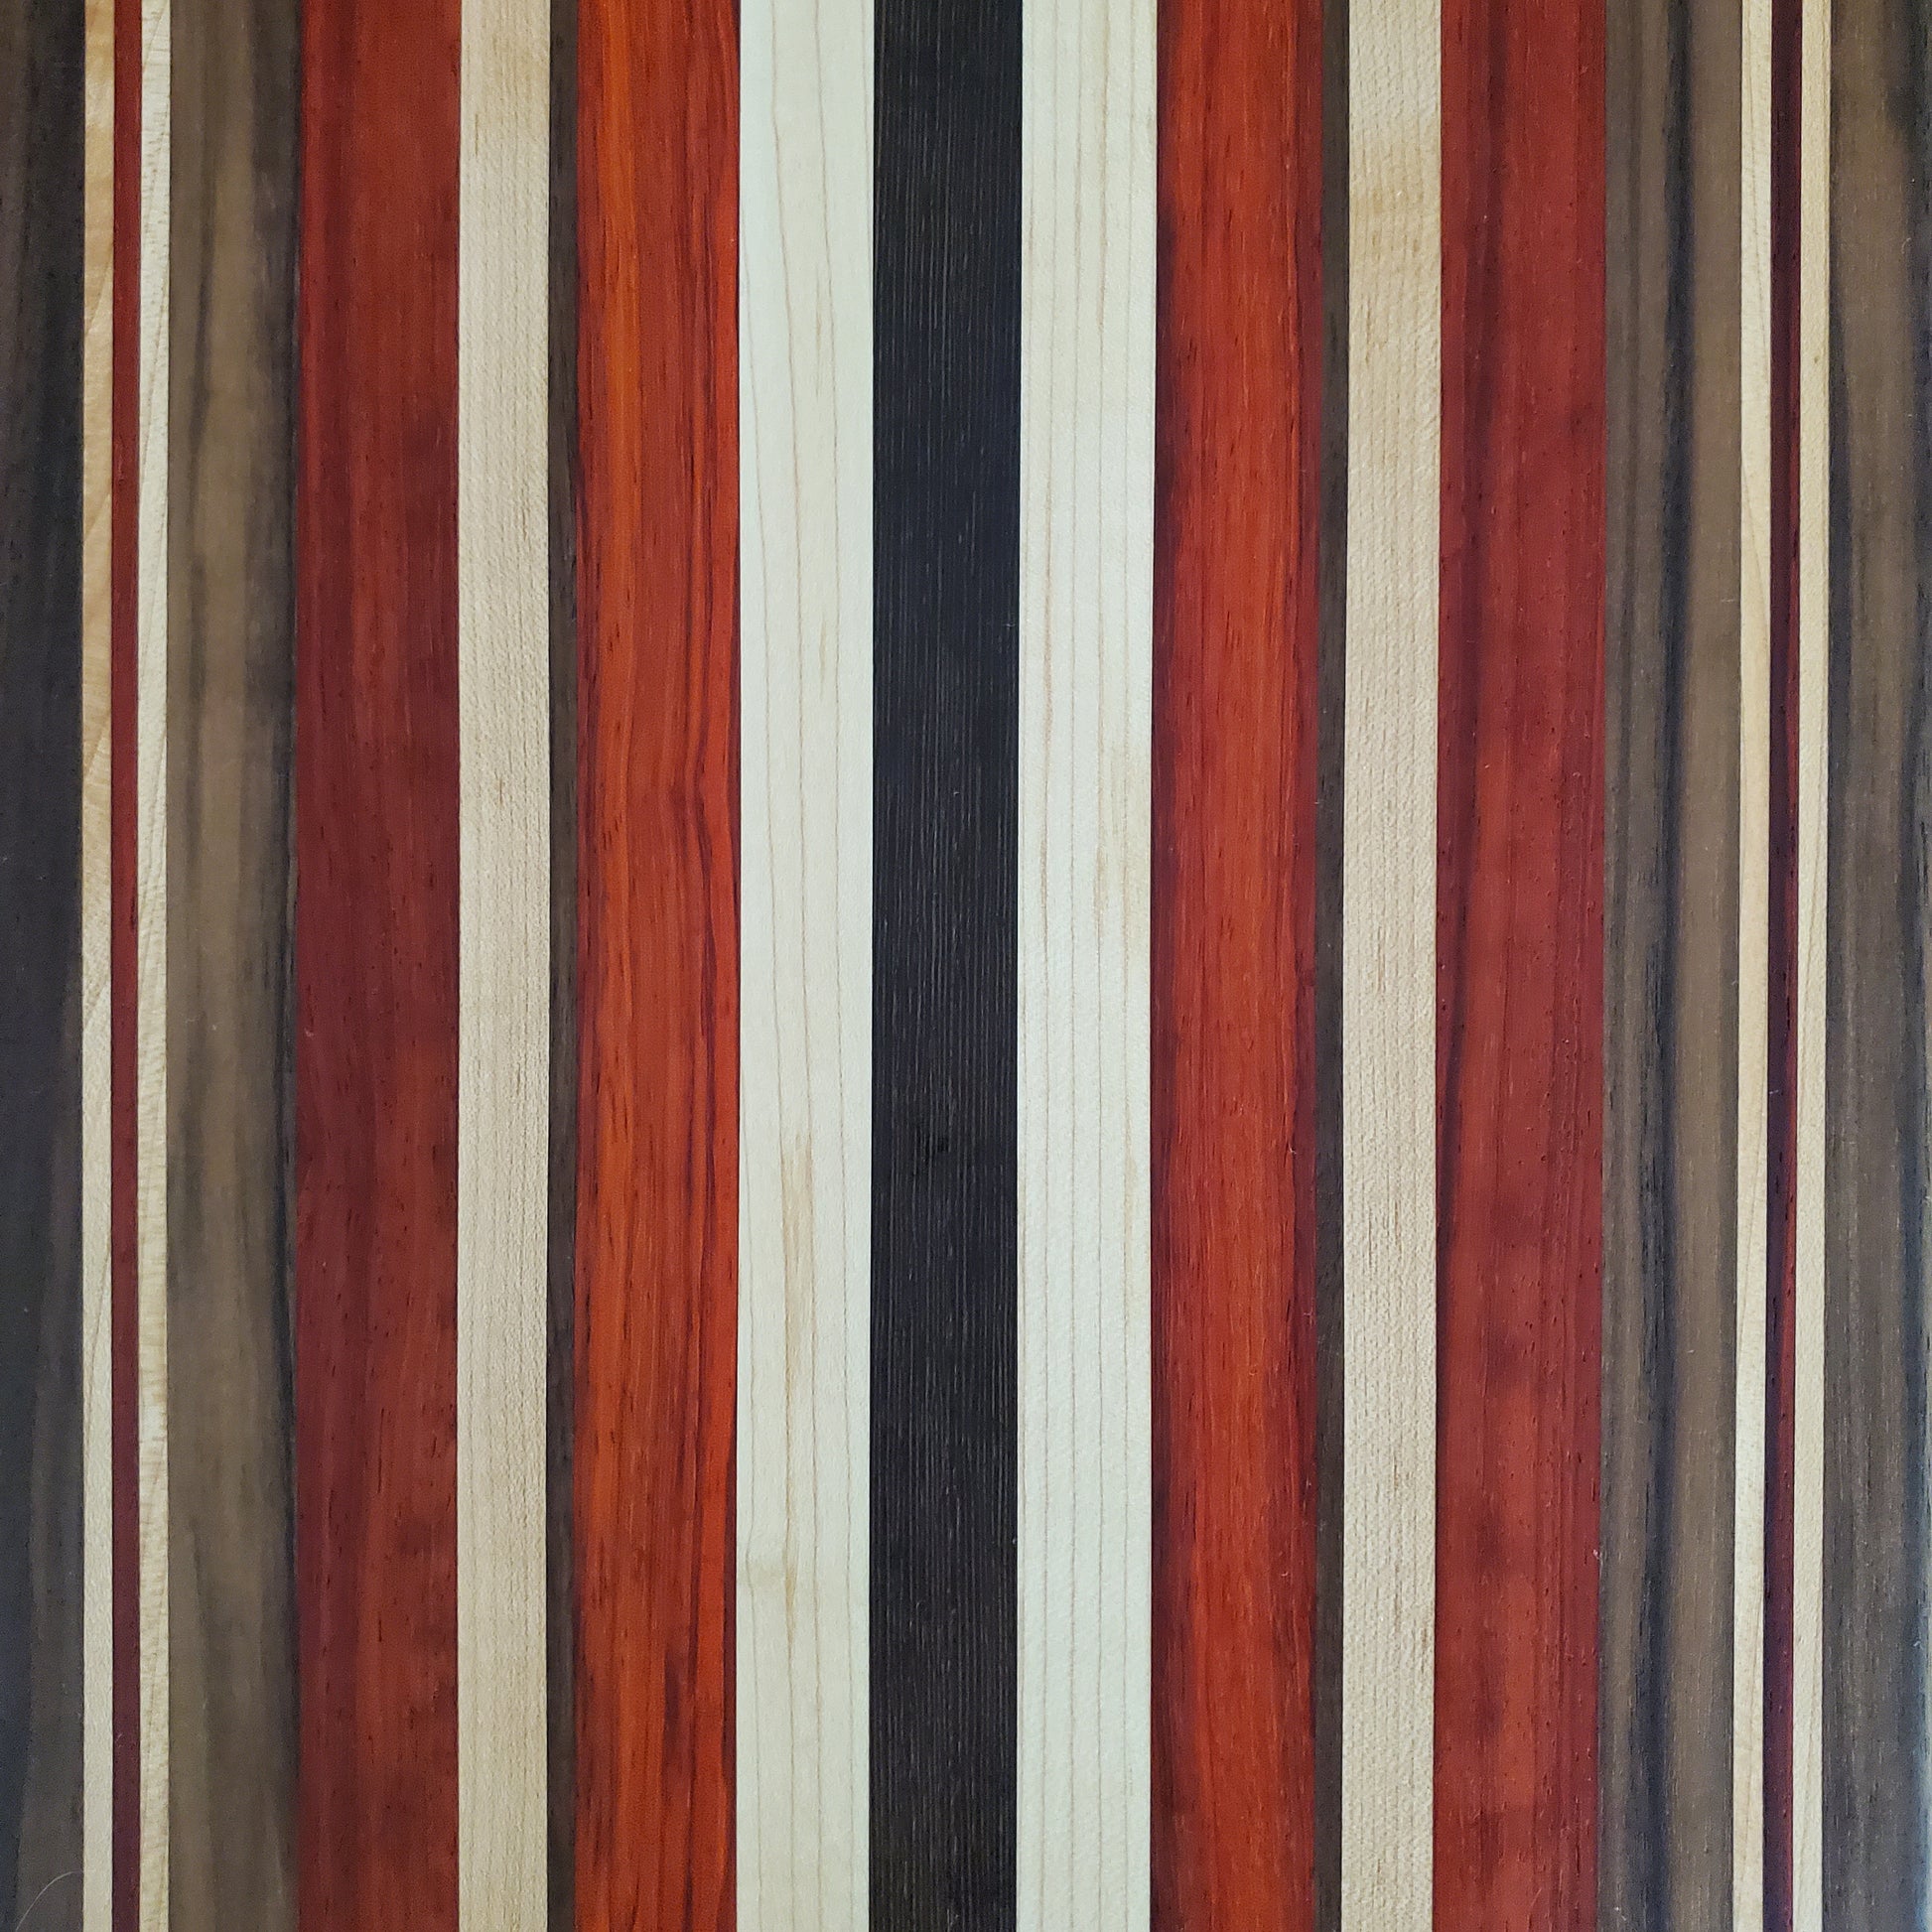 Signature Series October Fest cutting board made from maple, walnut, padauk, and wenge by Lone Wolf Wood Designs